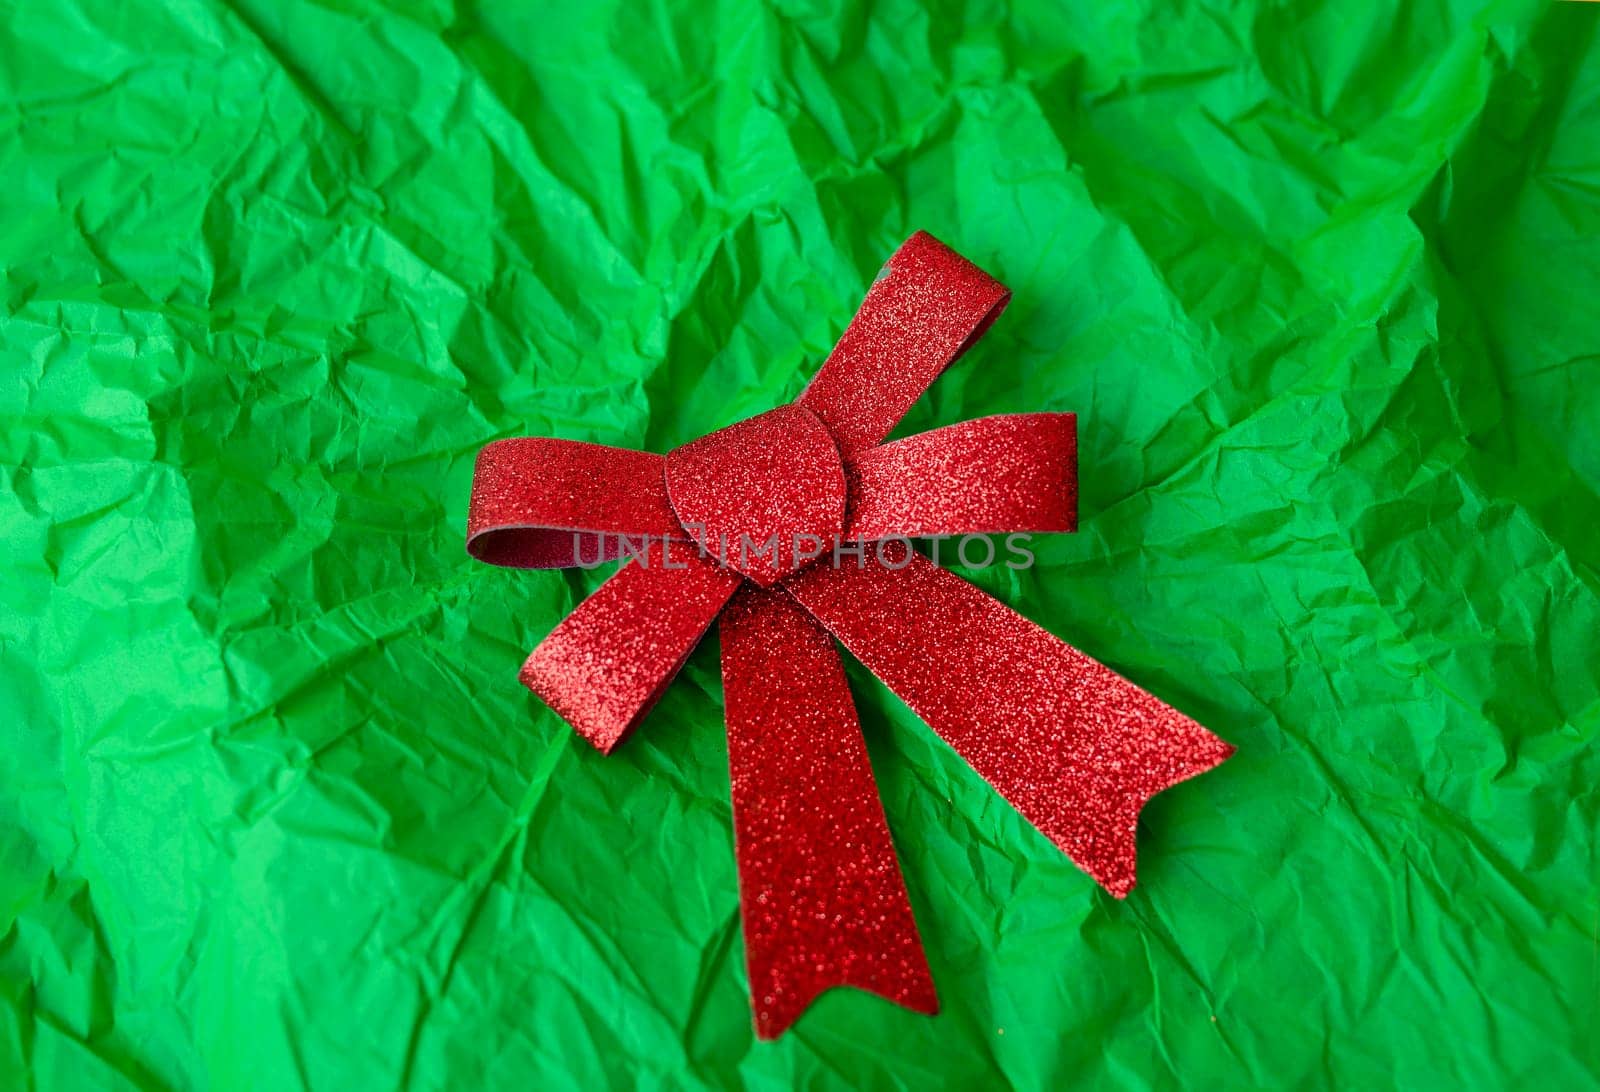 A photo of a red glittery bow on a green crumpled paper background. The bow is in the center of the image and the background fills the frame. by sfinks